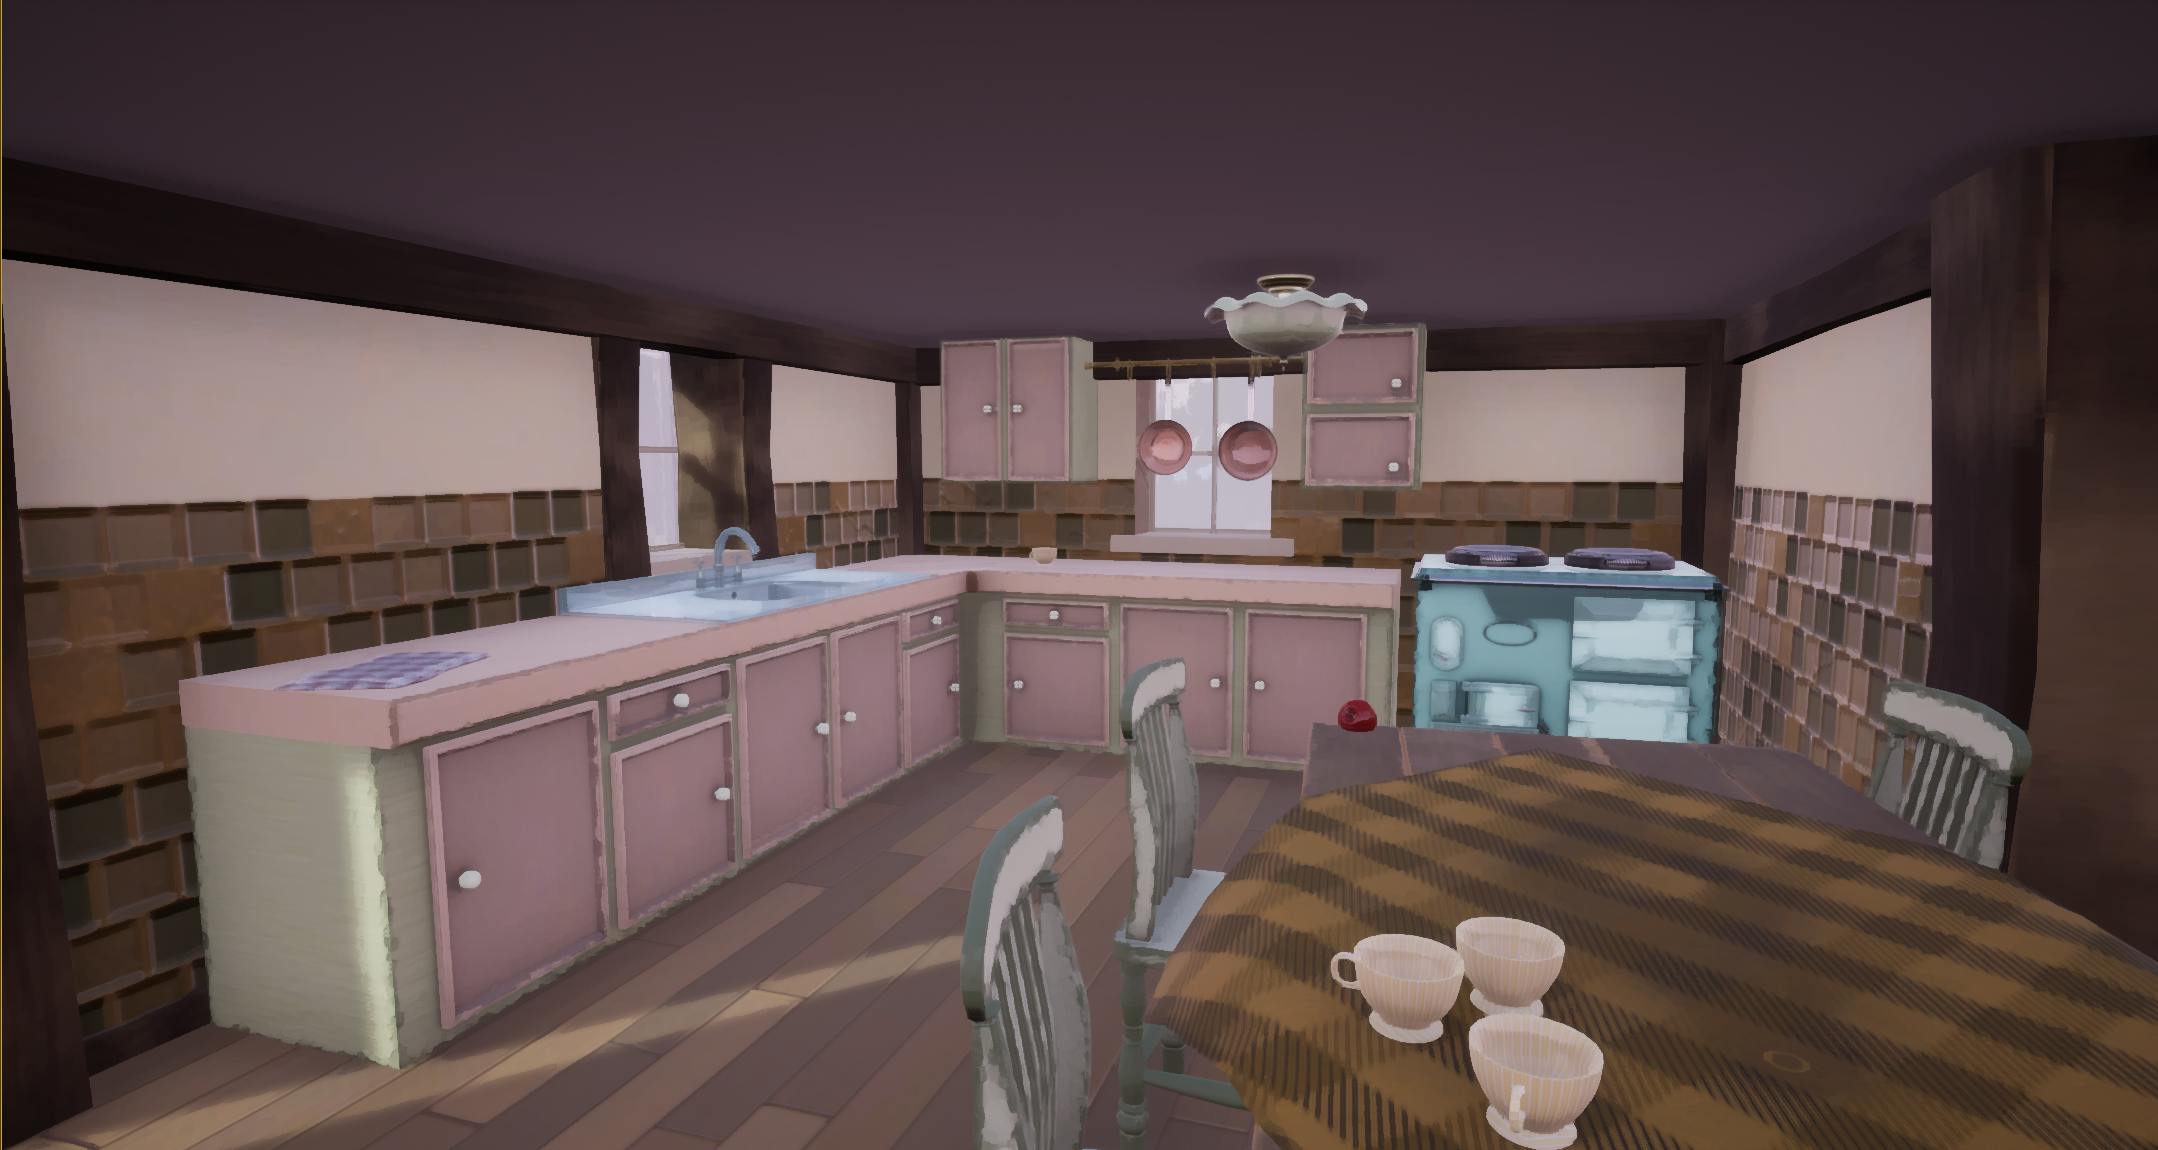 An image of the interior of Cornwall Cottage. In the foreground of the image is a table with a dark, checked tablecloth and three teacups. In the background is the kitchen, made up of cream and pink cabinets in an L-shape along two walls, a large square sink, and a silvery green aga. 